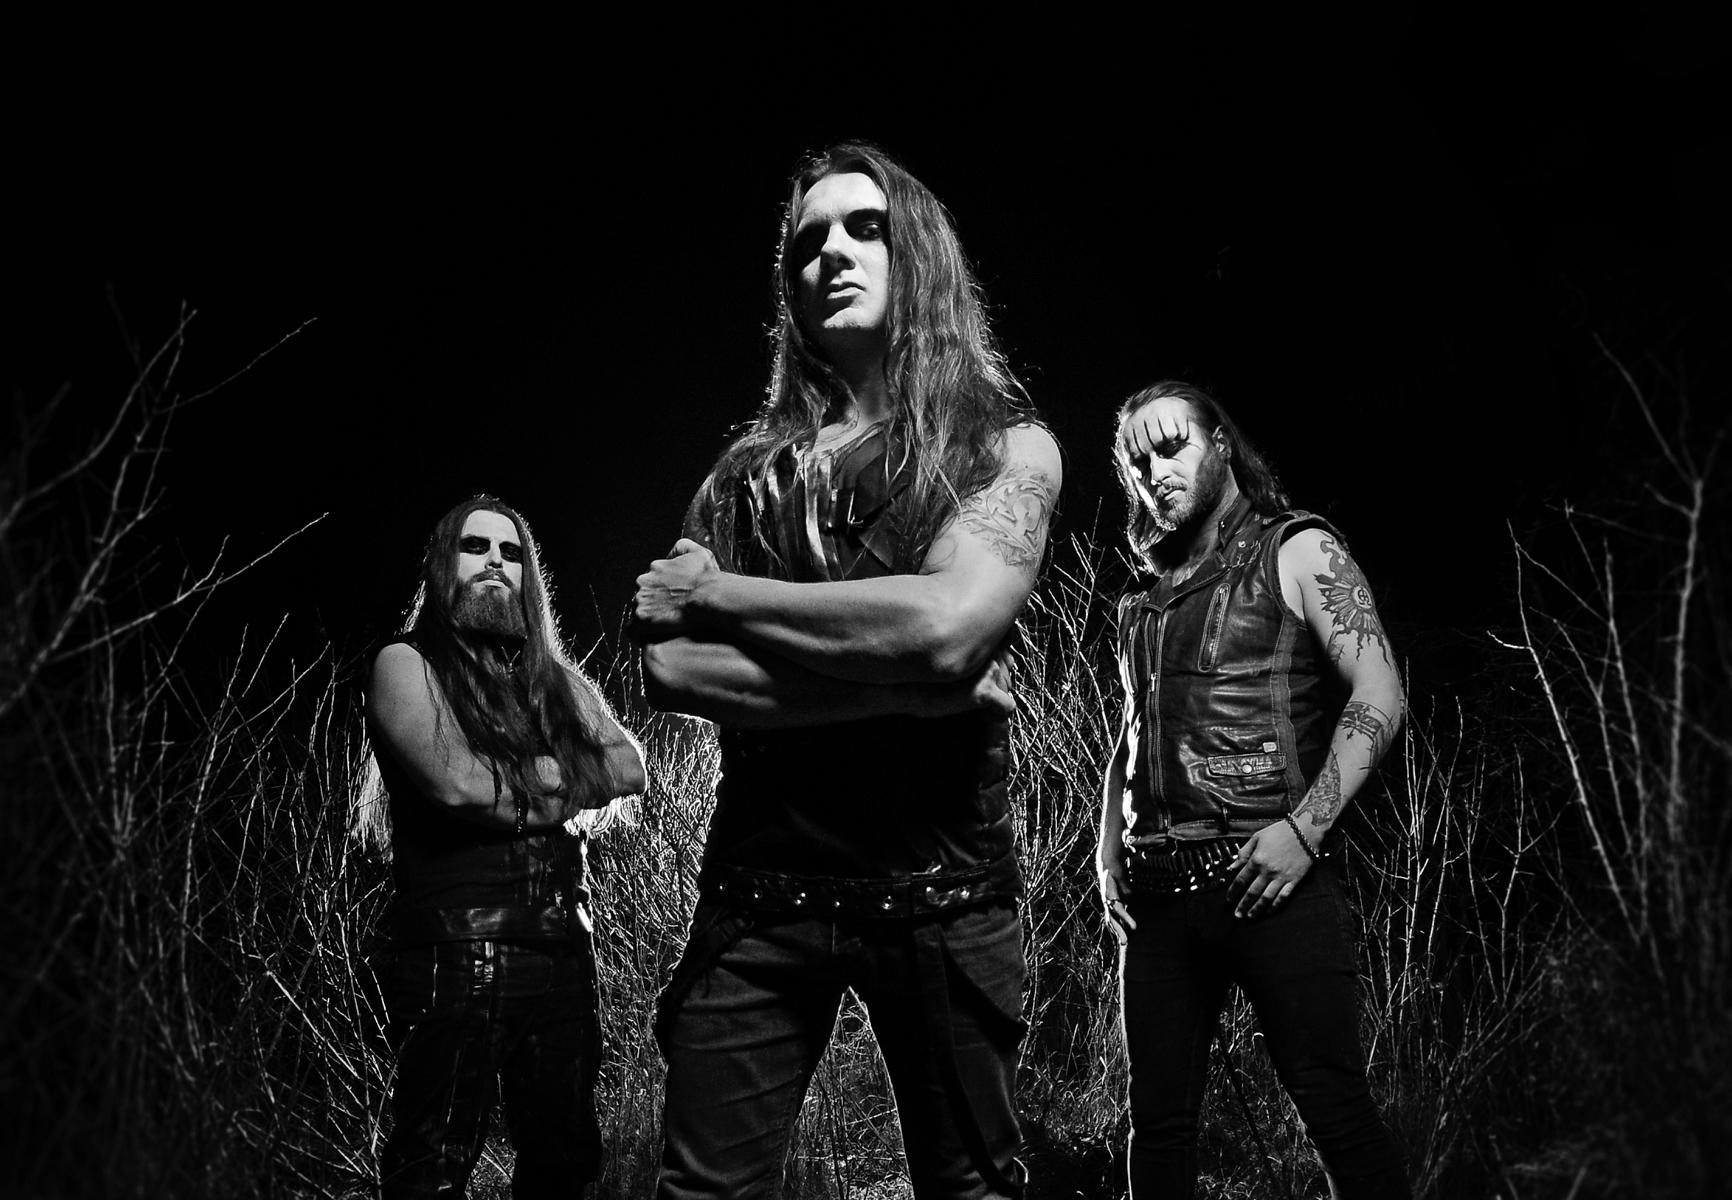 HATE – “LEVIATHAN” LYRIC VIDEO AVAILABLE FOR STREAMING